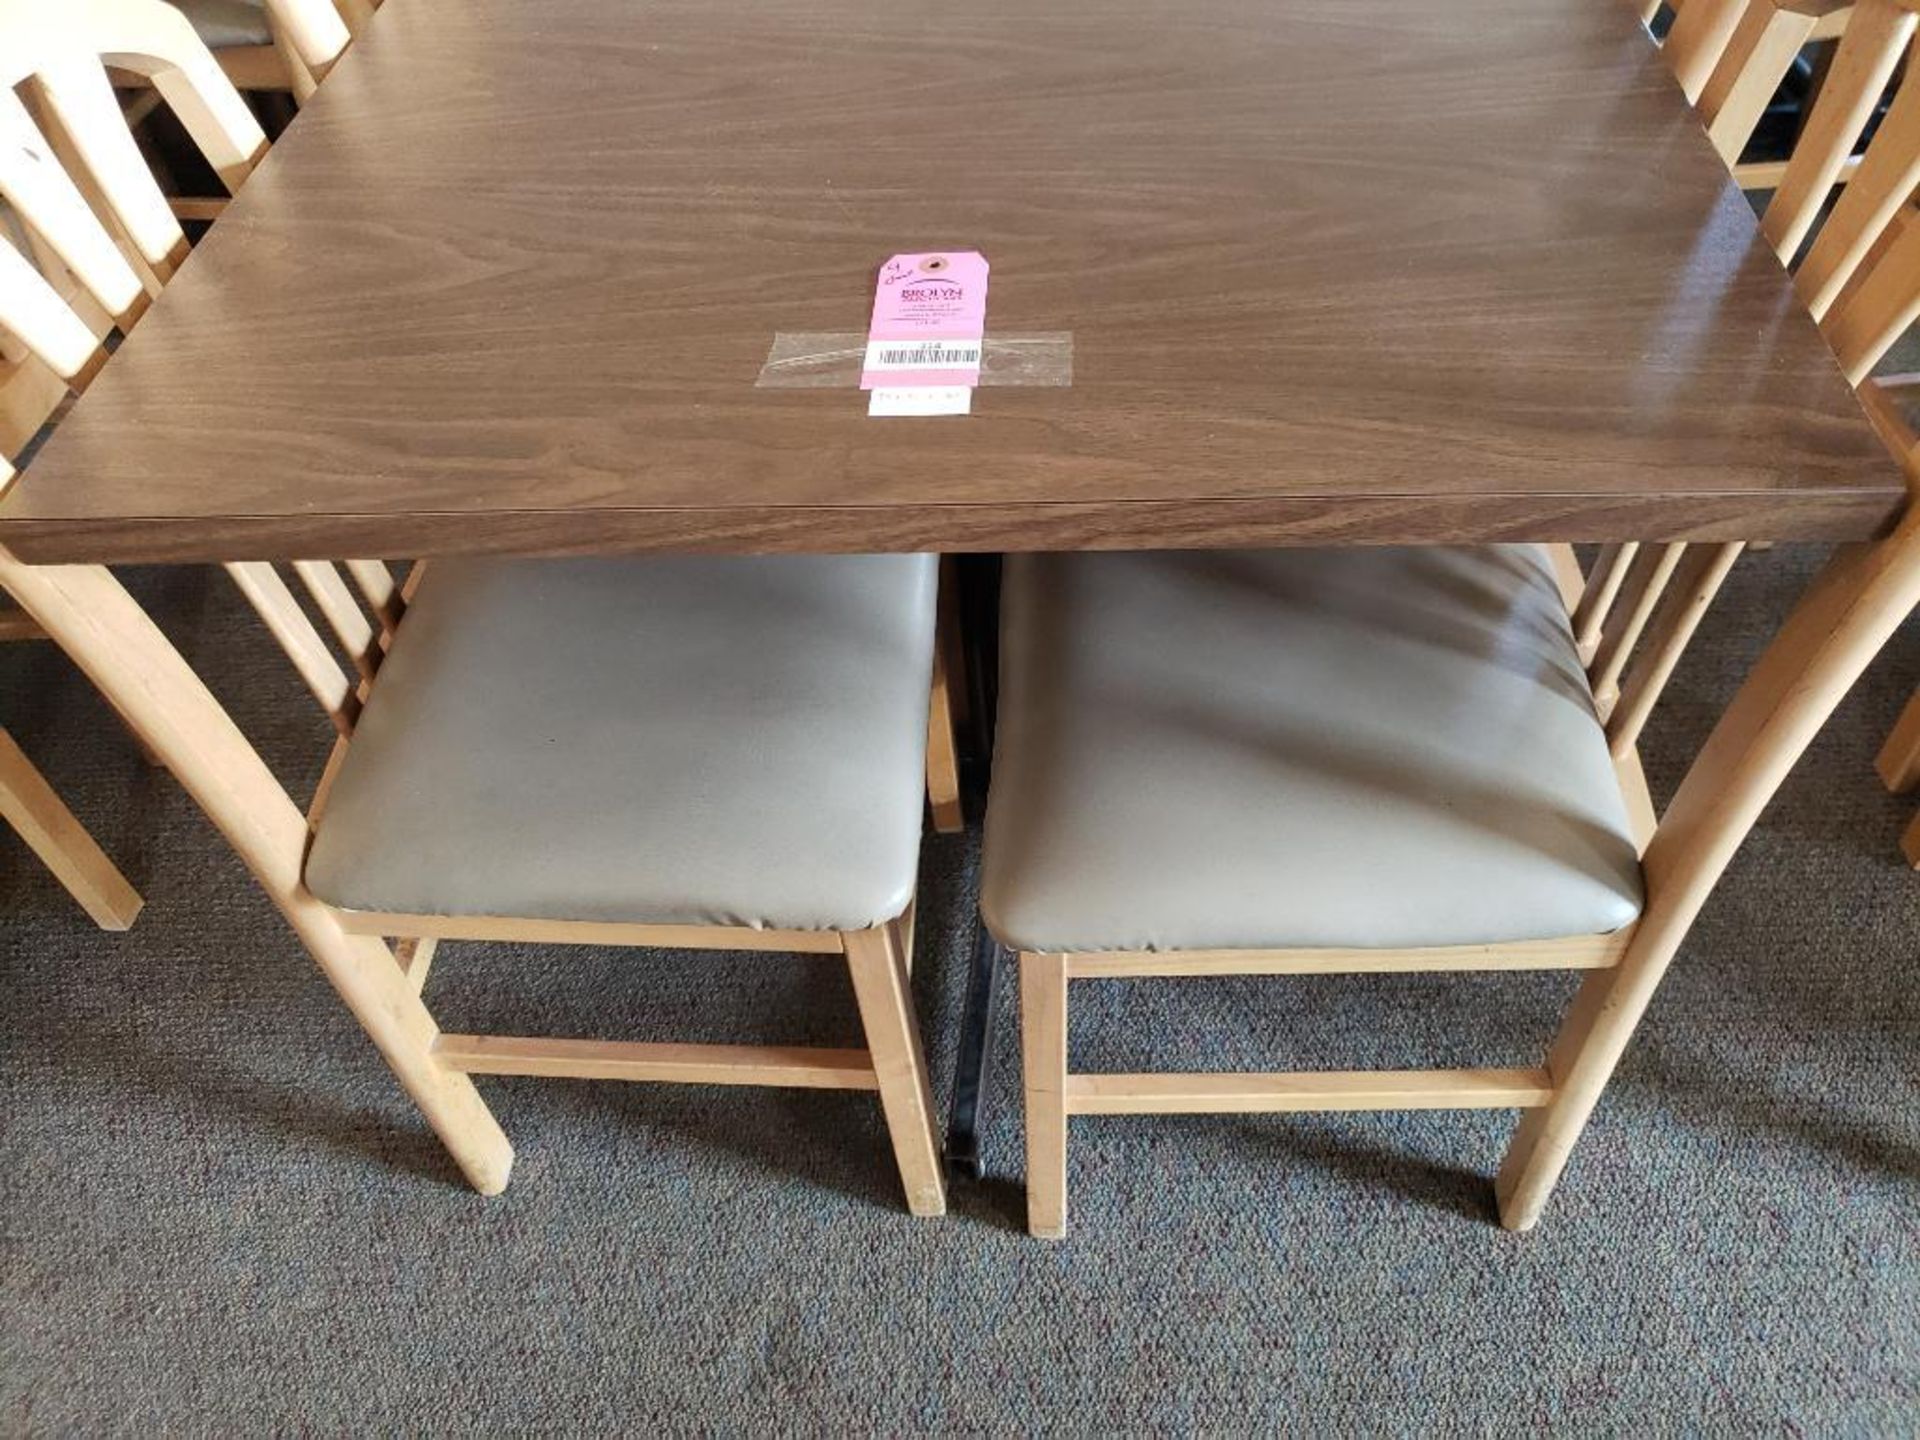 Table with 4 chairs. Table size 35in x 35in. - Image 2 of 5